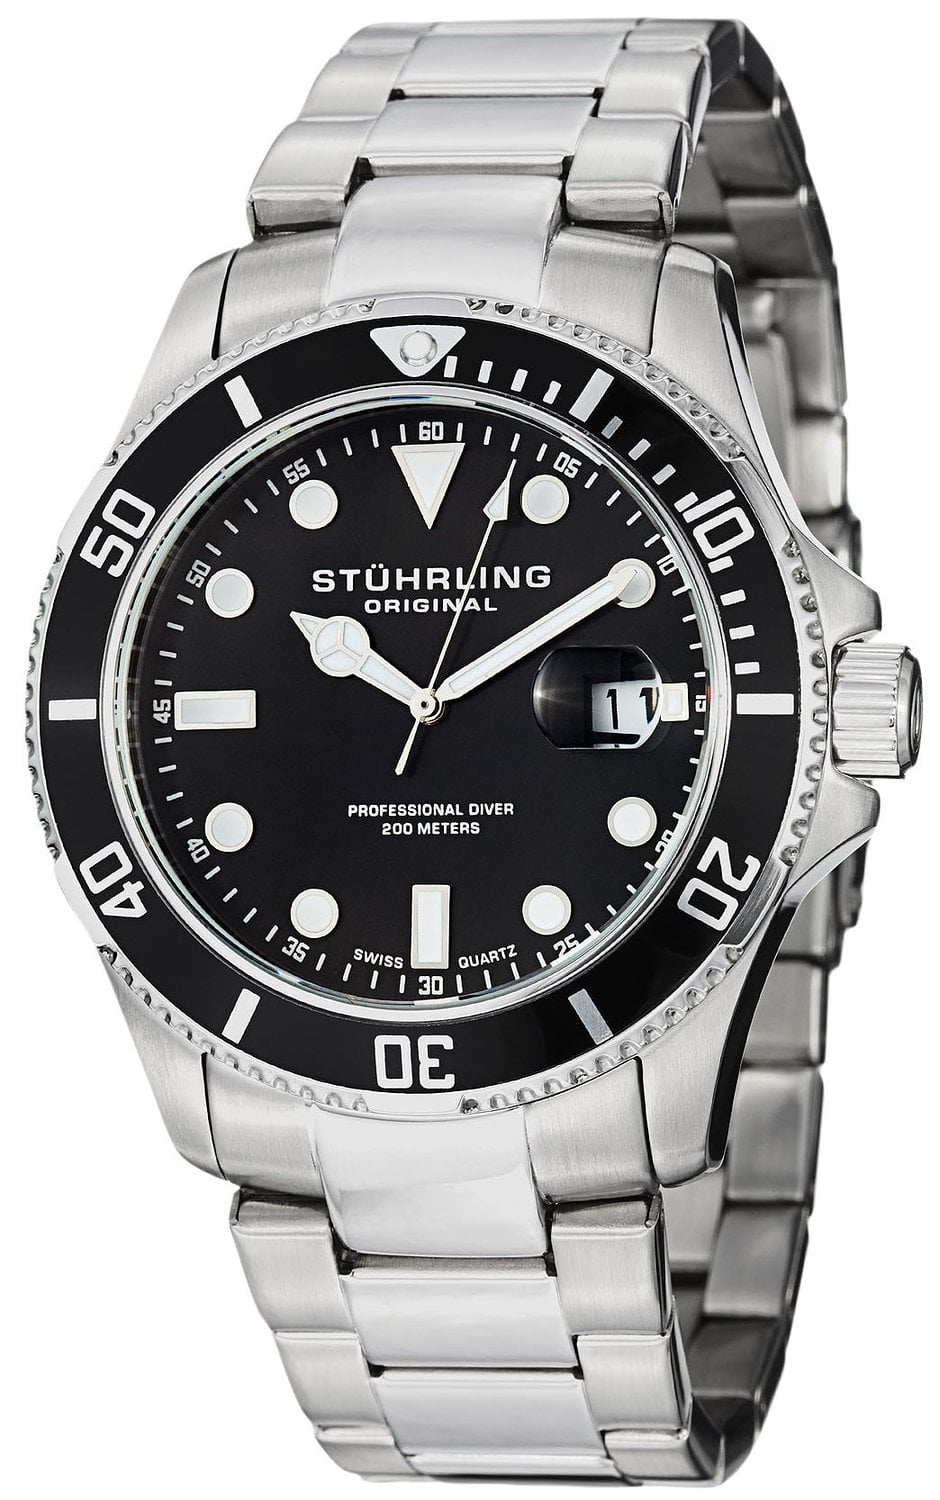 Stuhrling Watch Review - Are Stuhrling Watches Good? | WMM